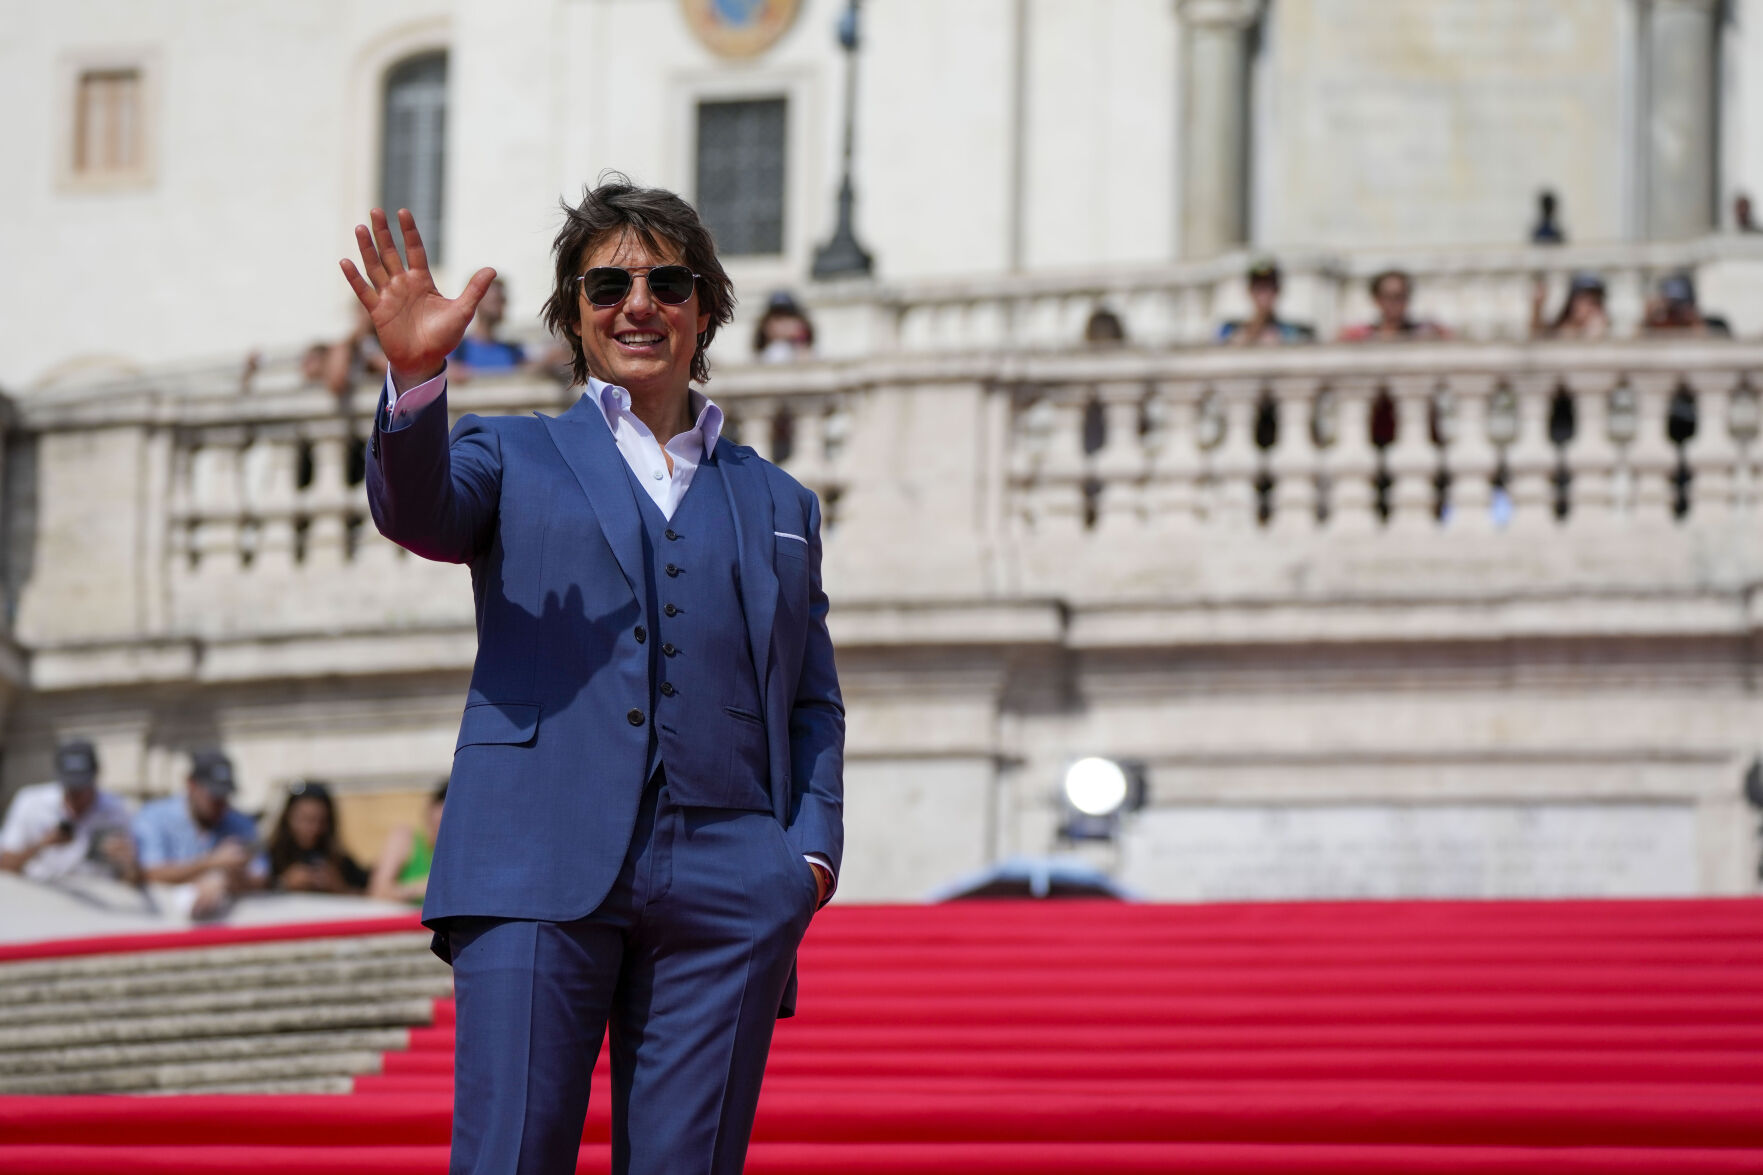 US producer and actor Tom Cruise poses on the Spanish Steps ahead of the premiere of "Mission: Impossible - Dead Reckoning Part One" movie in Rome, on June 19, 2023. 